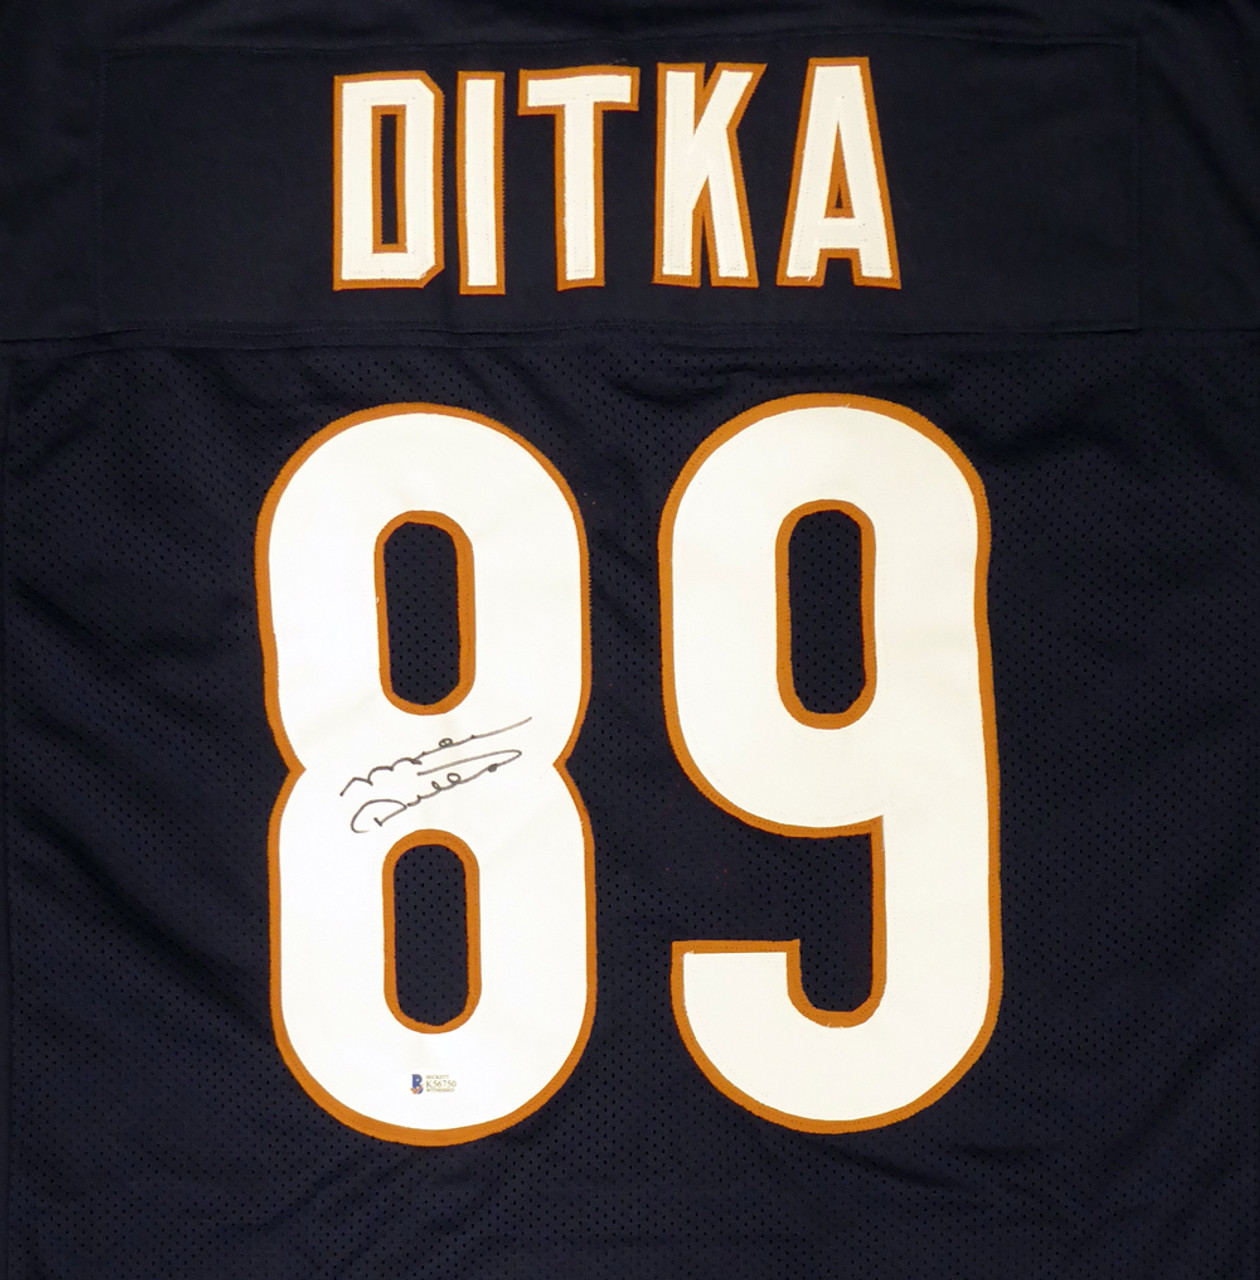 chicago bears mike ditka jersey